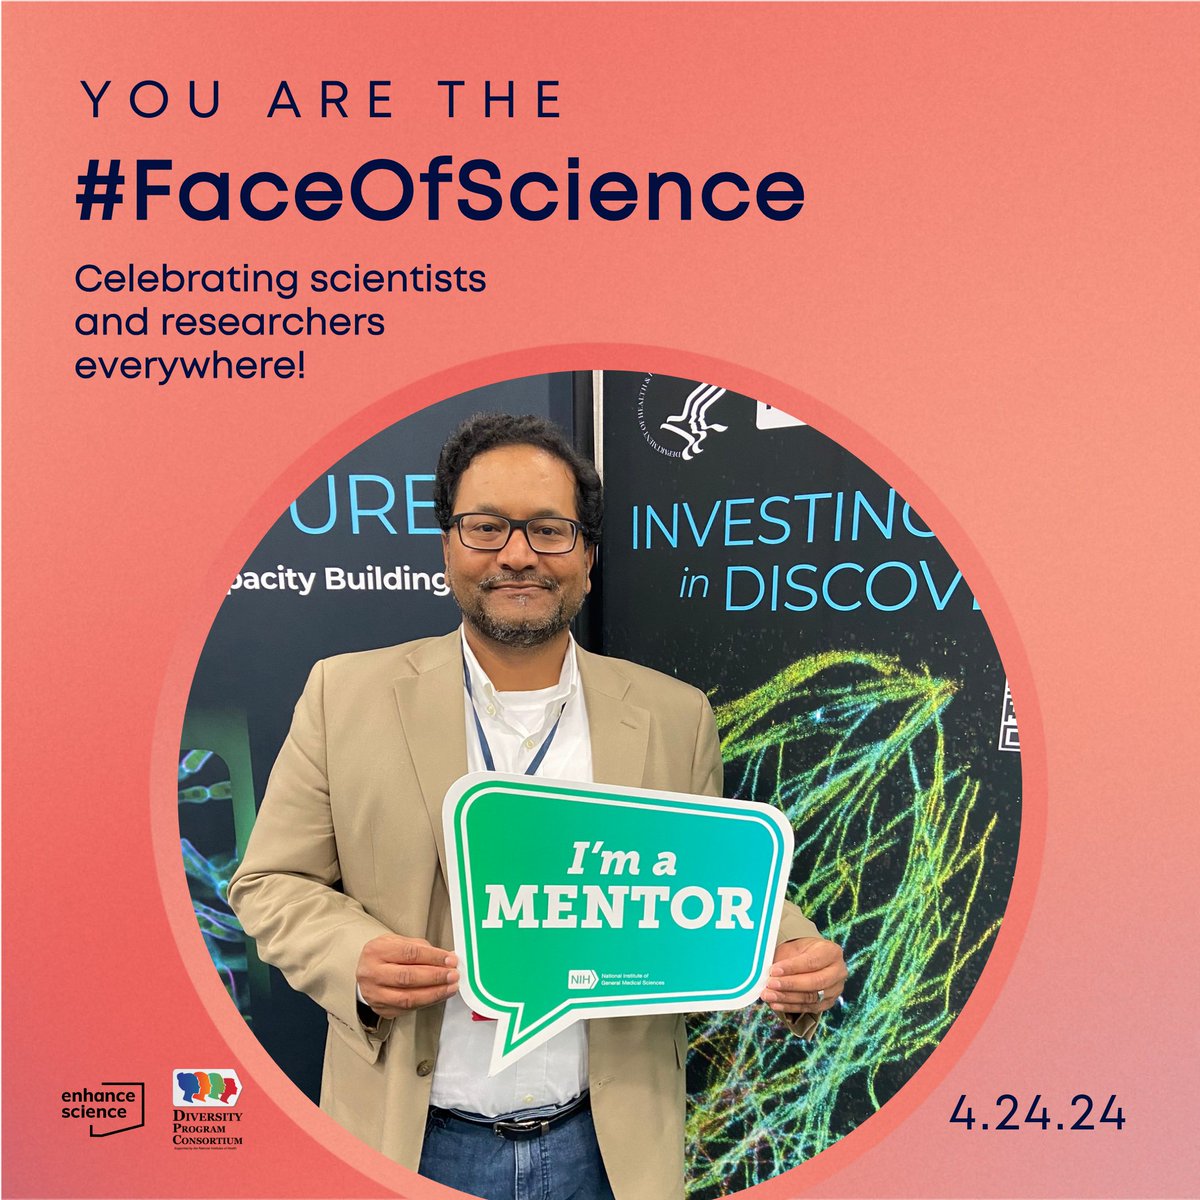 'As a scientist and mentor, I find great joy in developing innovative technology and fostering creative thinking in mentees.'- Dr. Toufeeq Syed is an associate professor & assistant dean at @McWilliamsSBMI at @UTHealthHouston. He's also a co-lead of the @NRMNET! #FaceOfScience